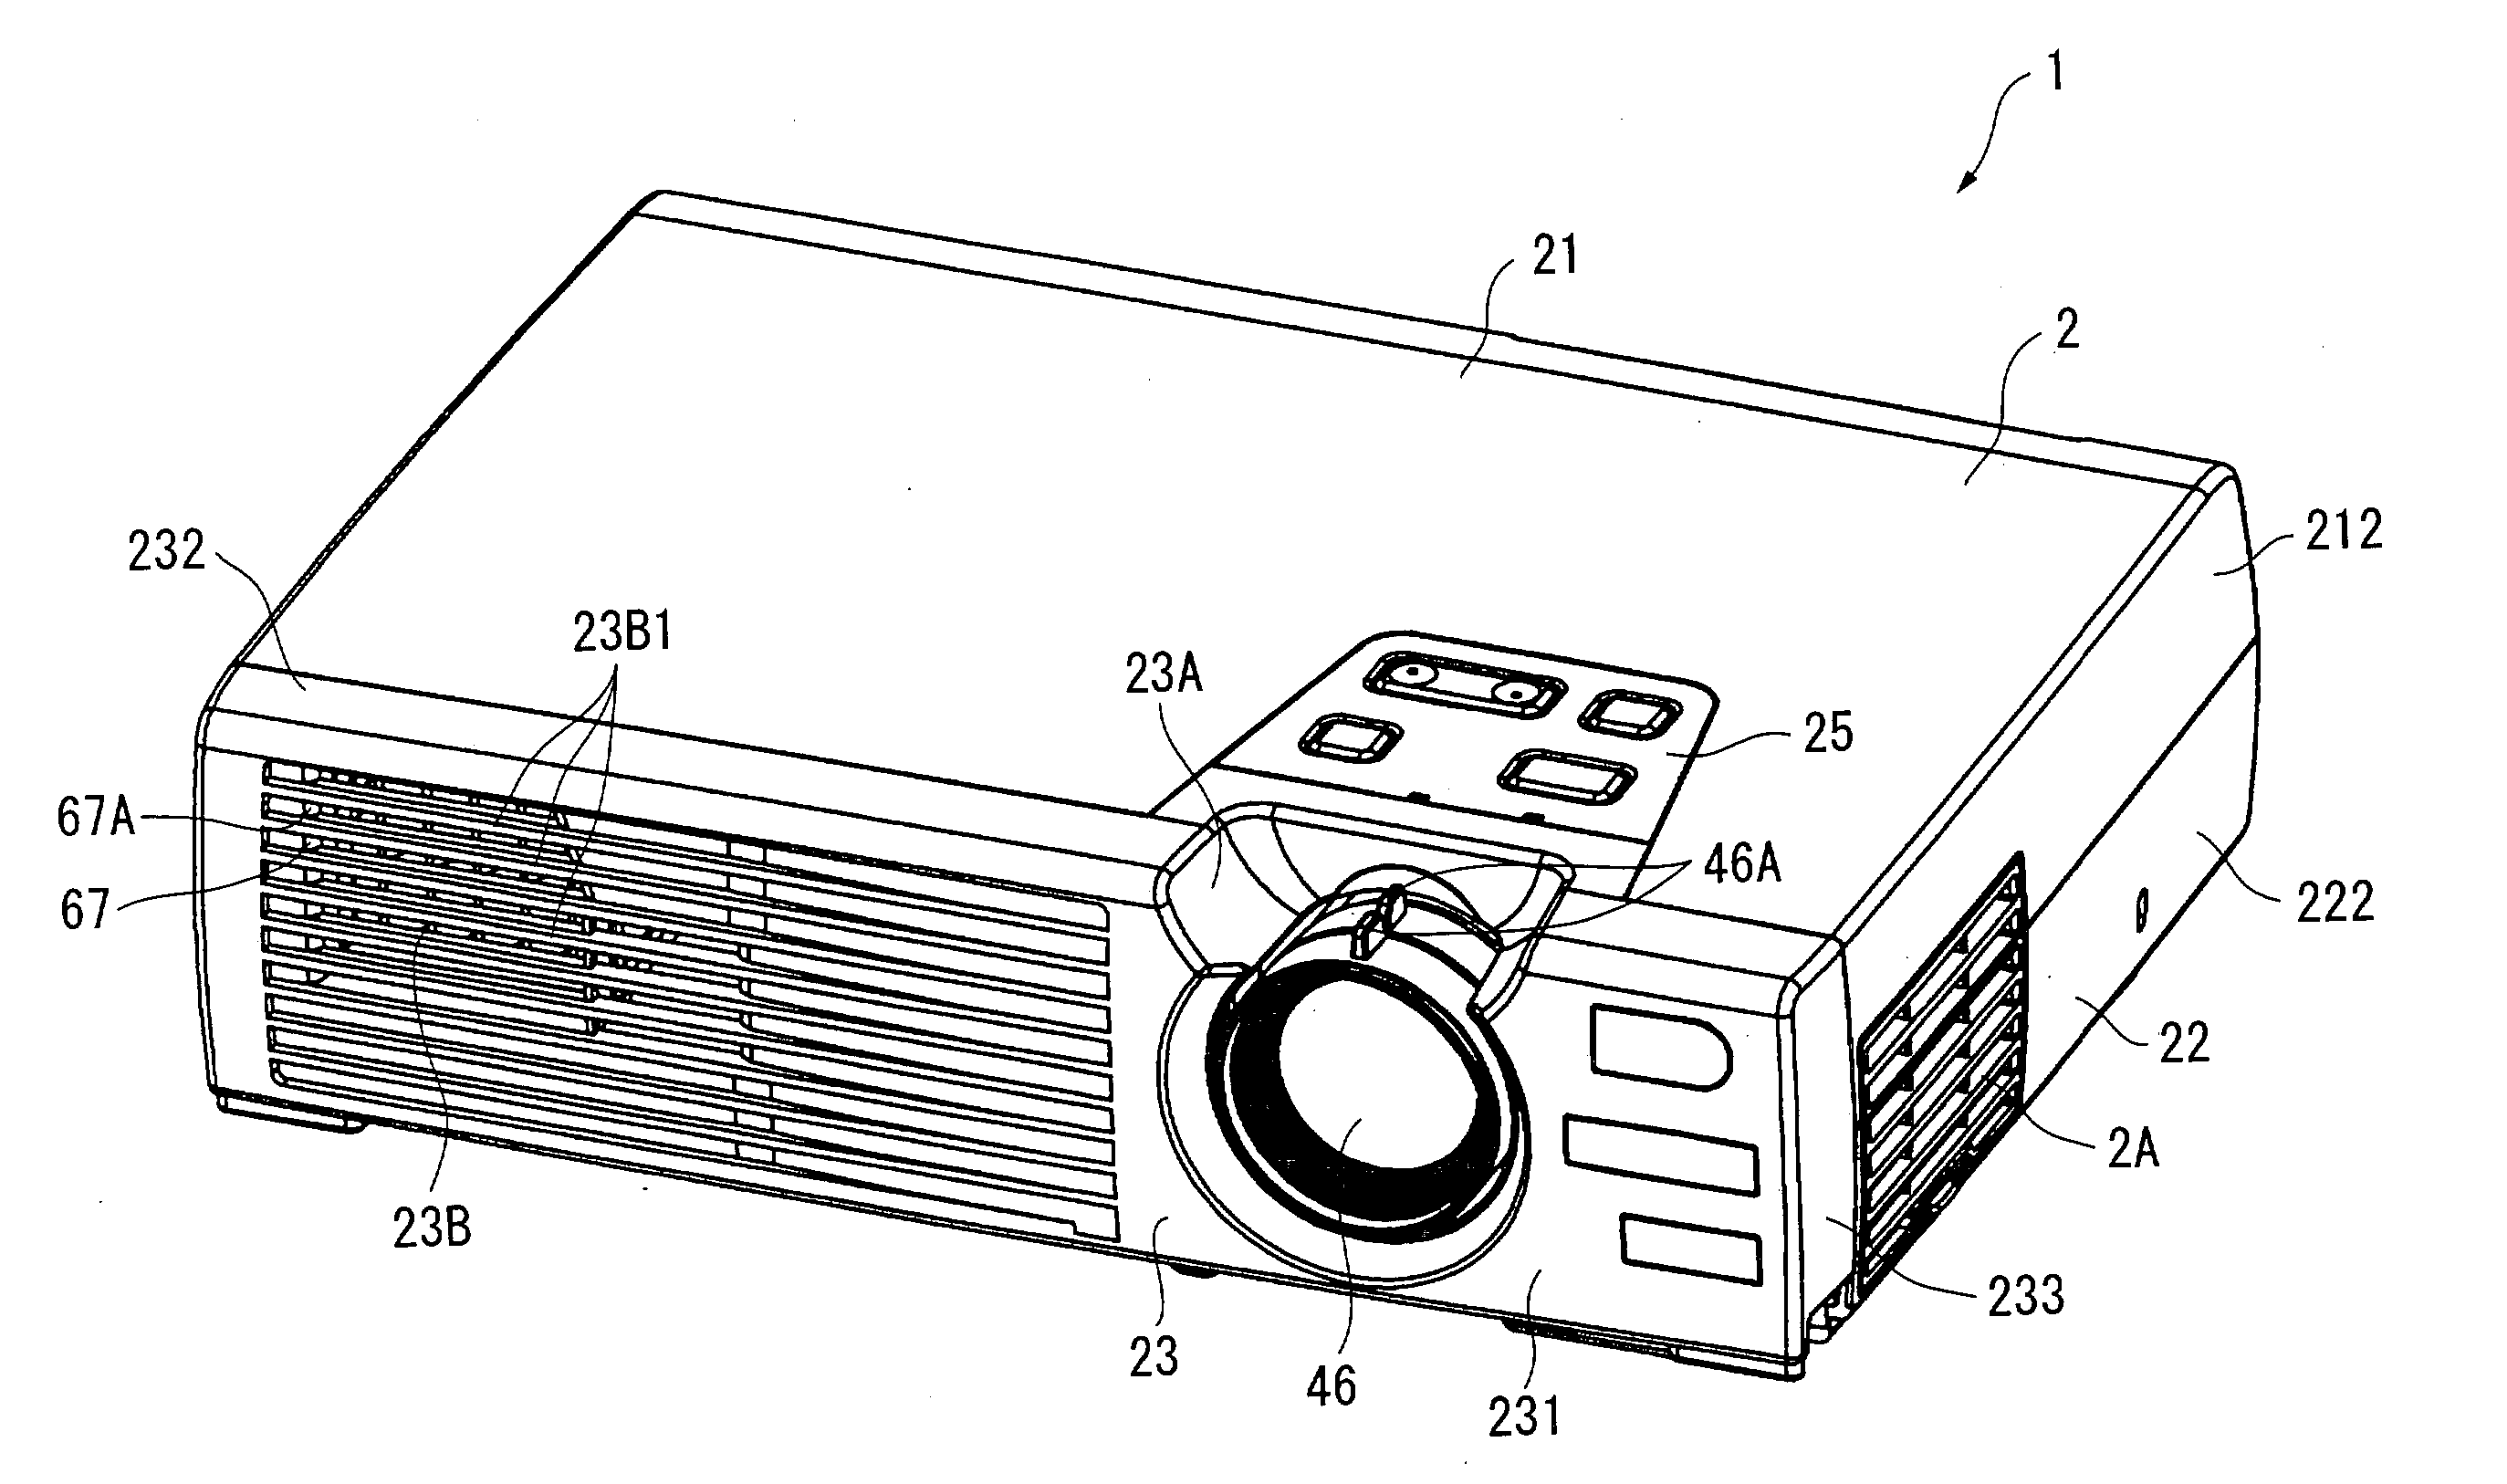 Electronics exterior case and projector having the same